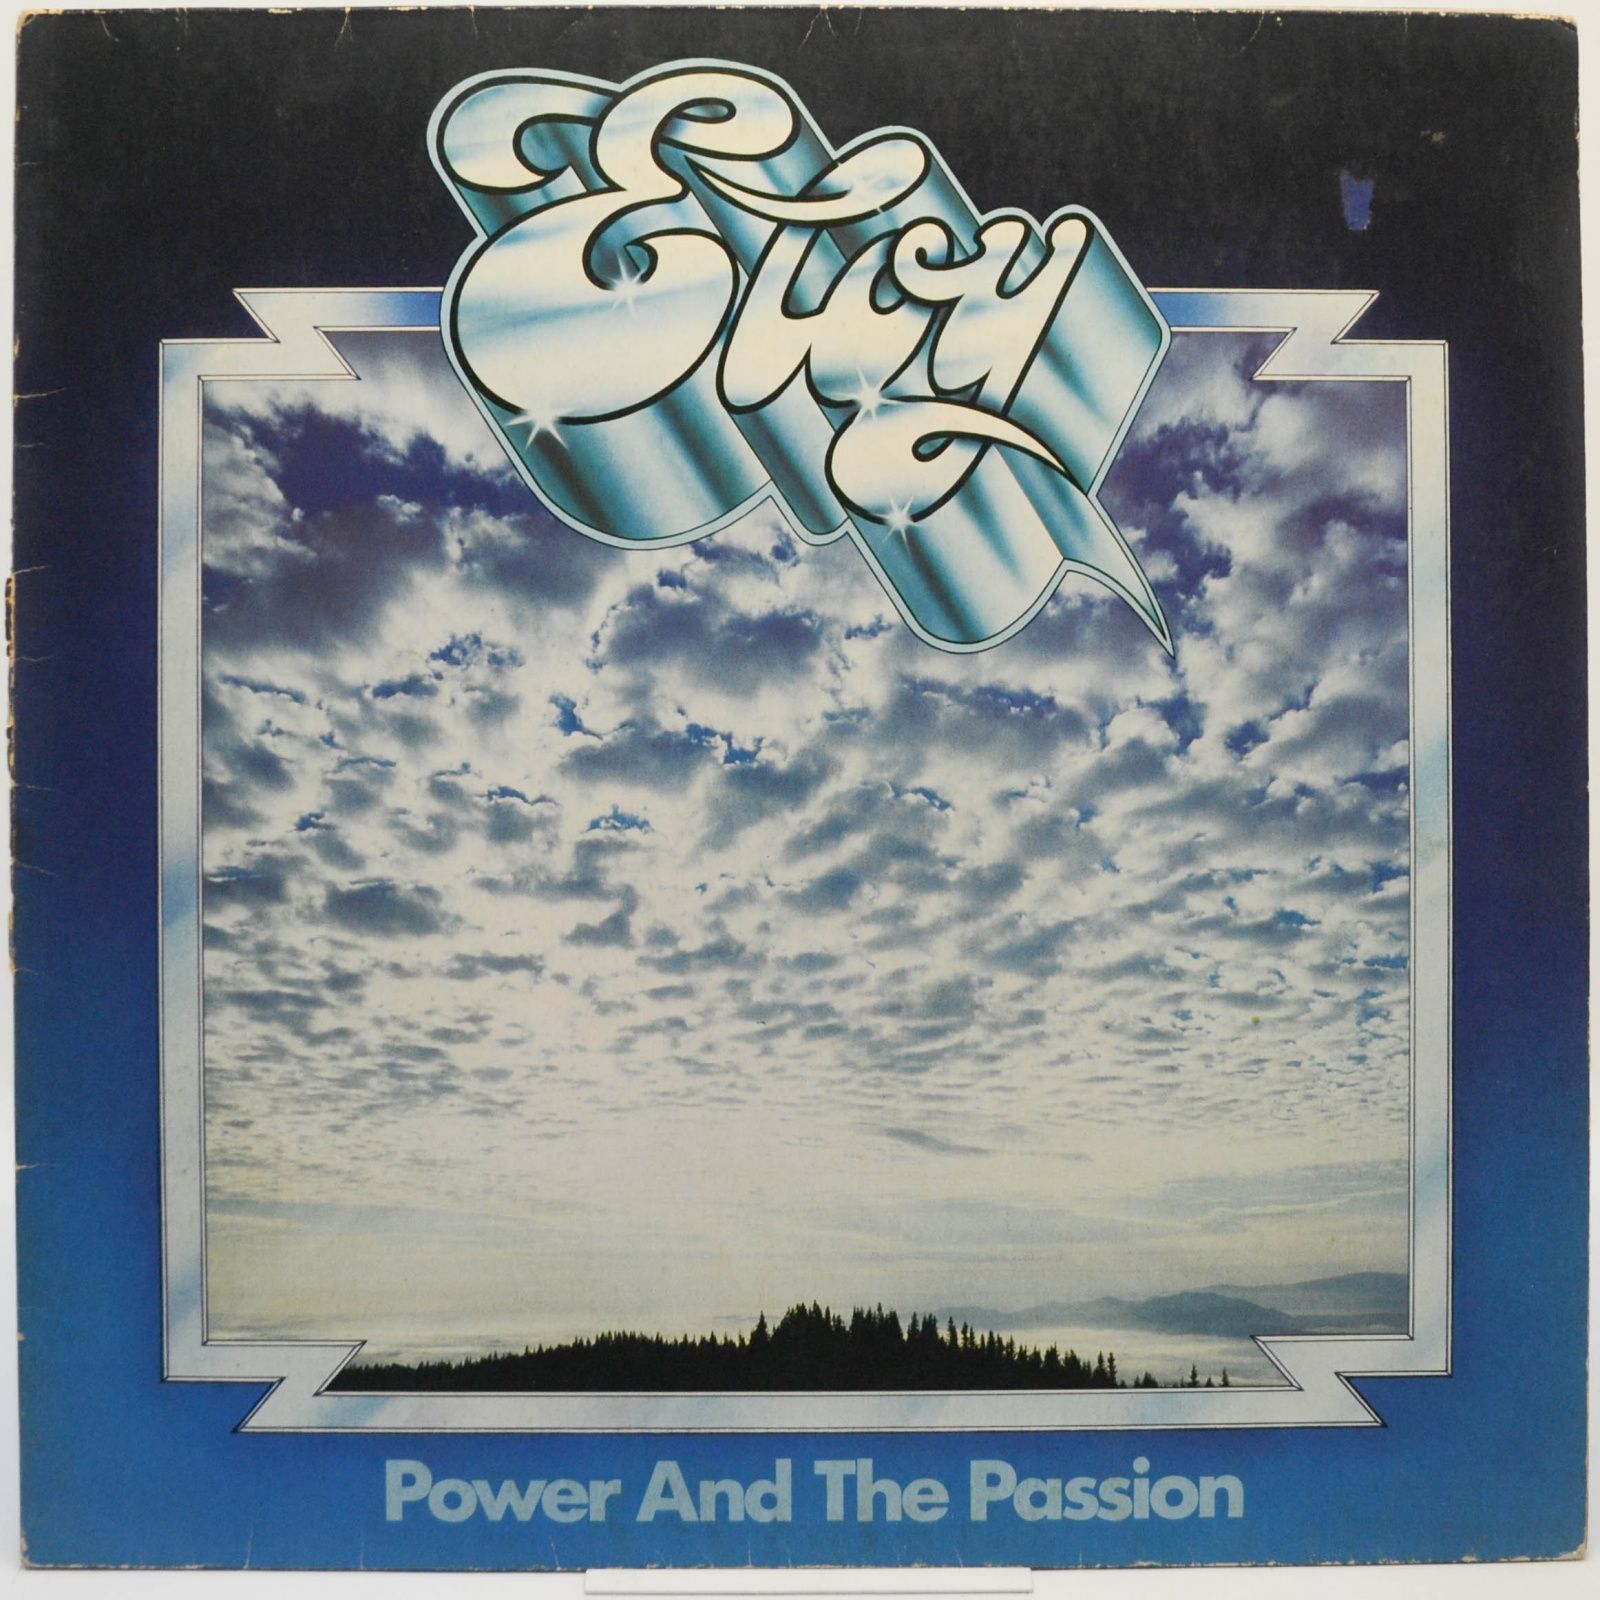 Power And The Passion, 1975